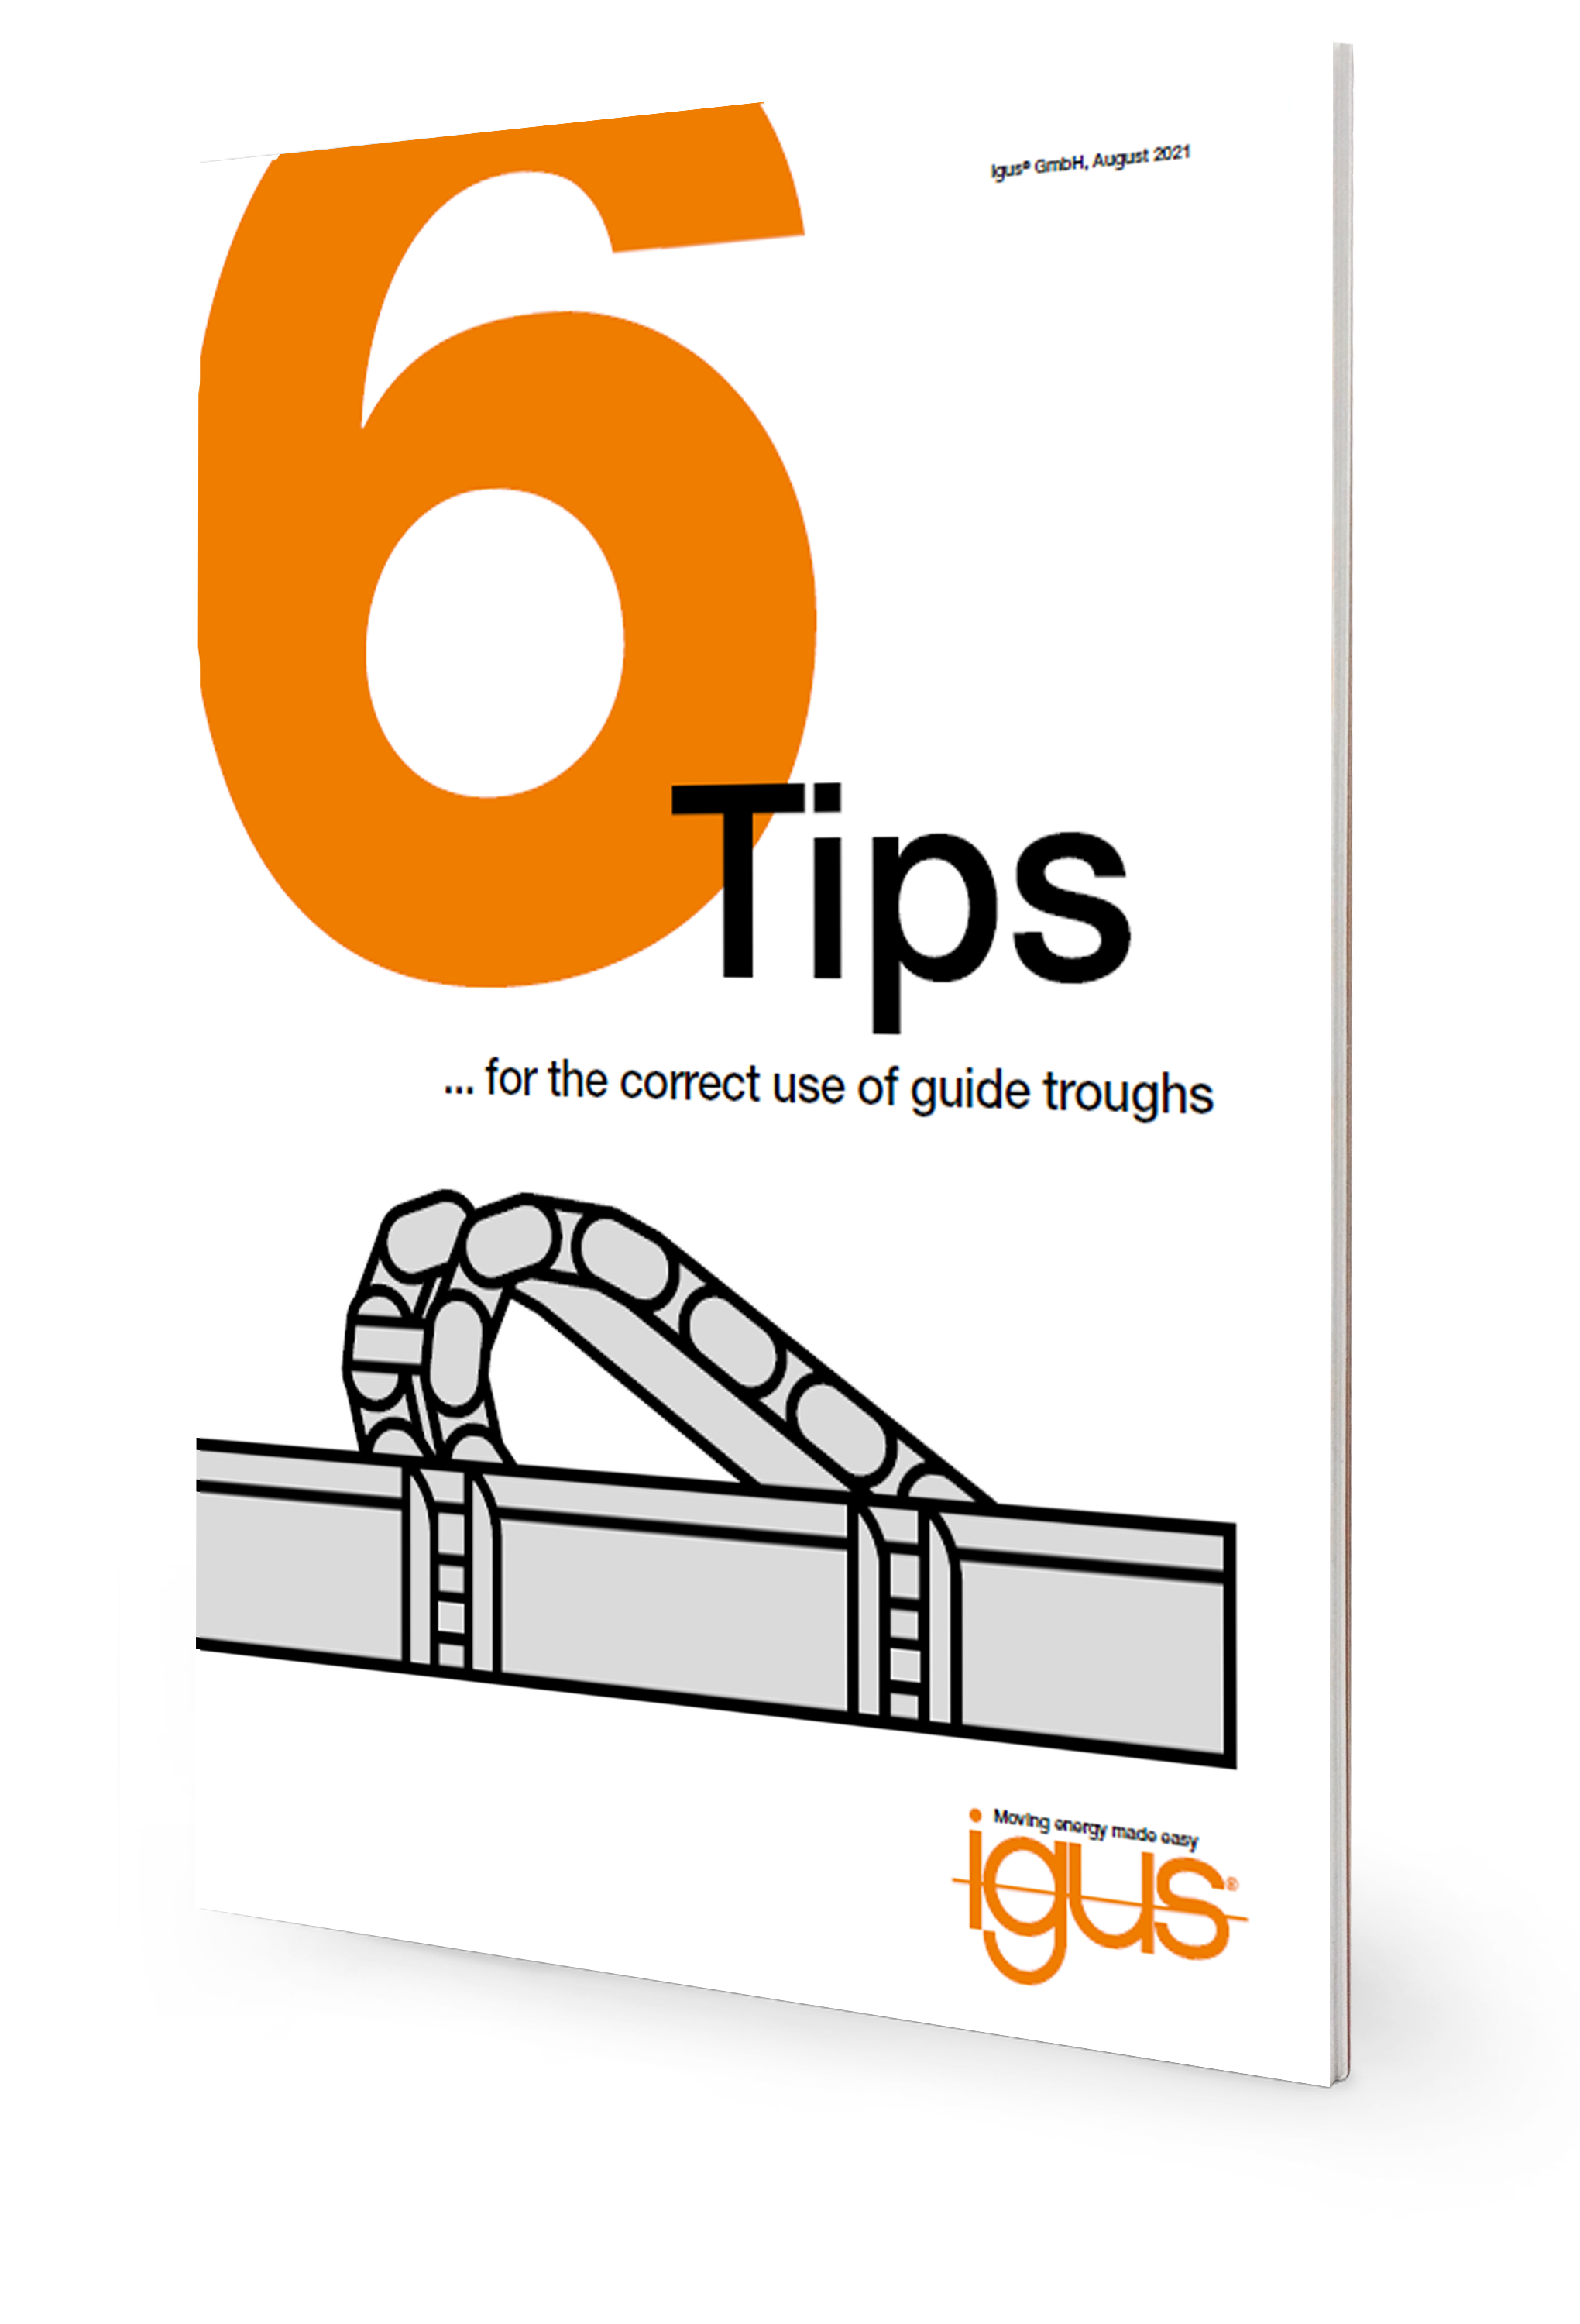 Tips for the correct use of guide troughs